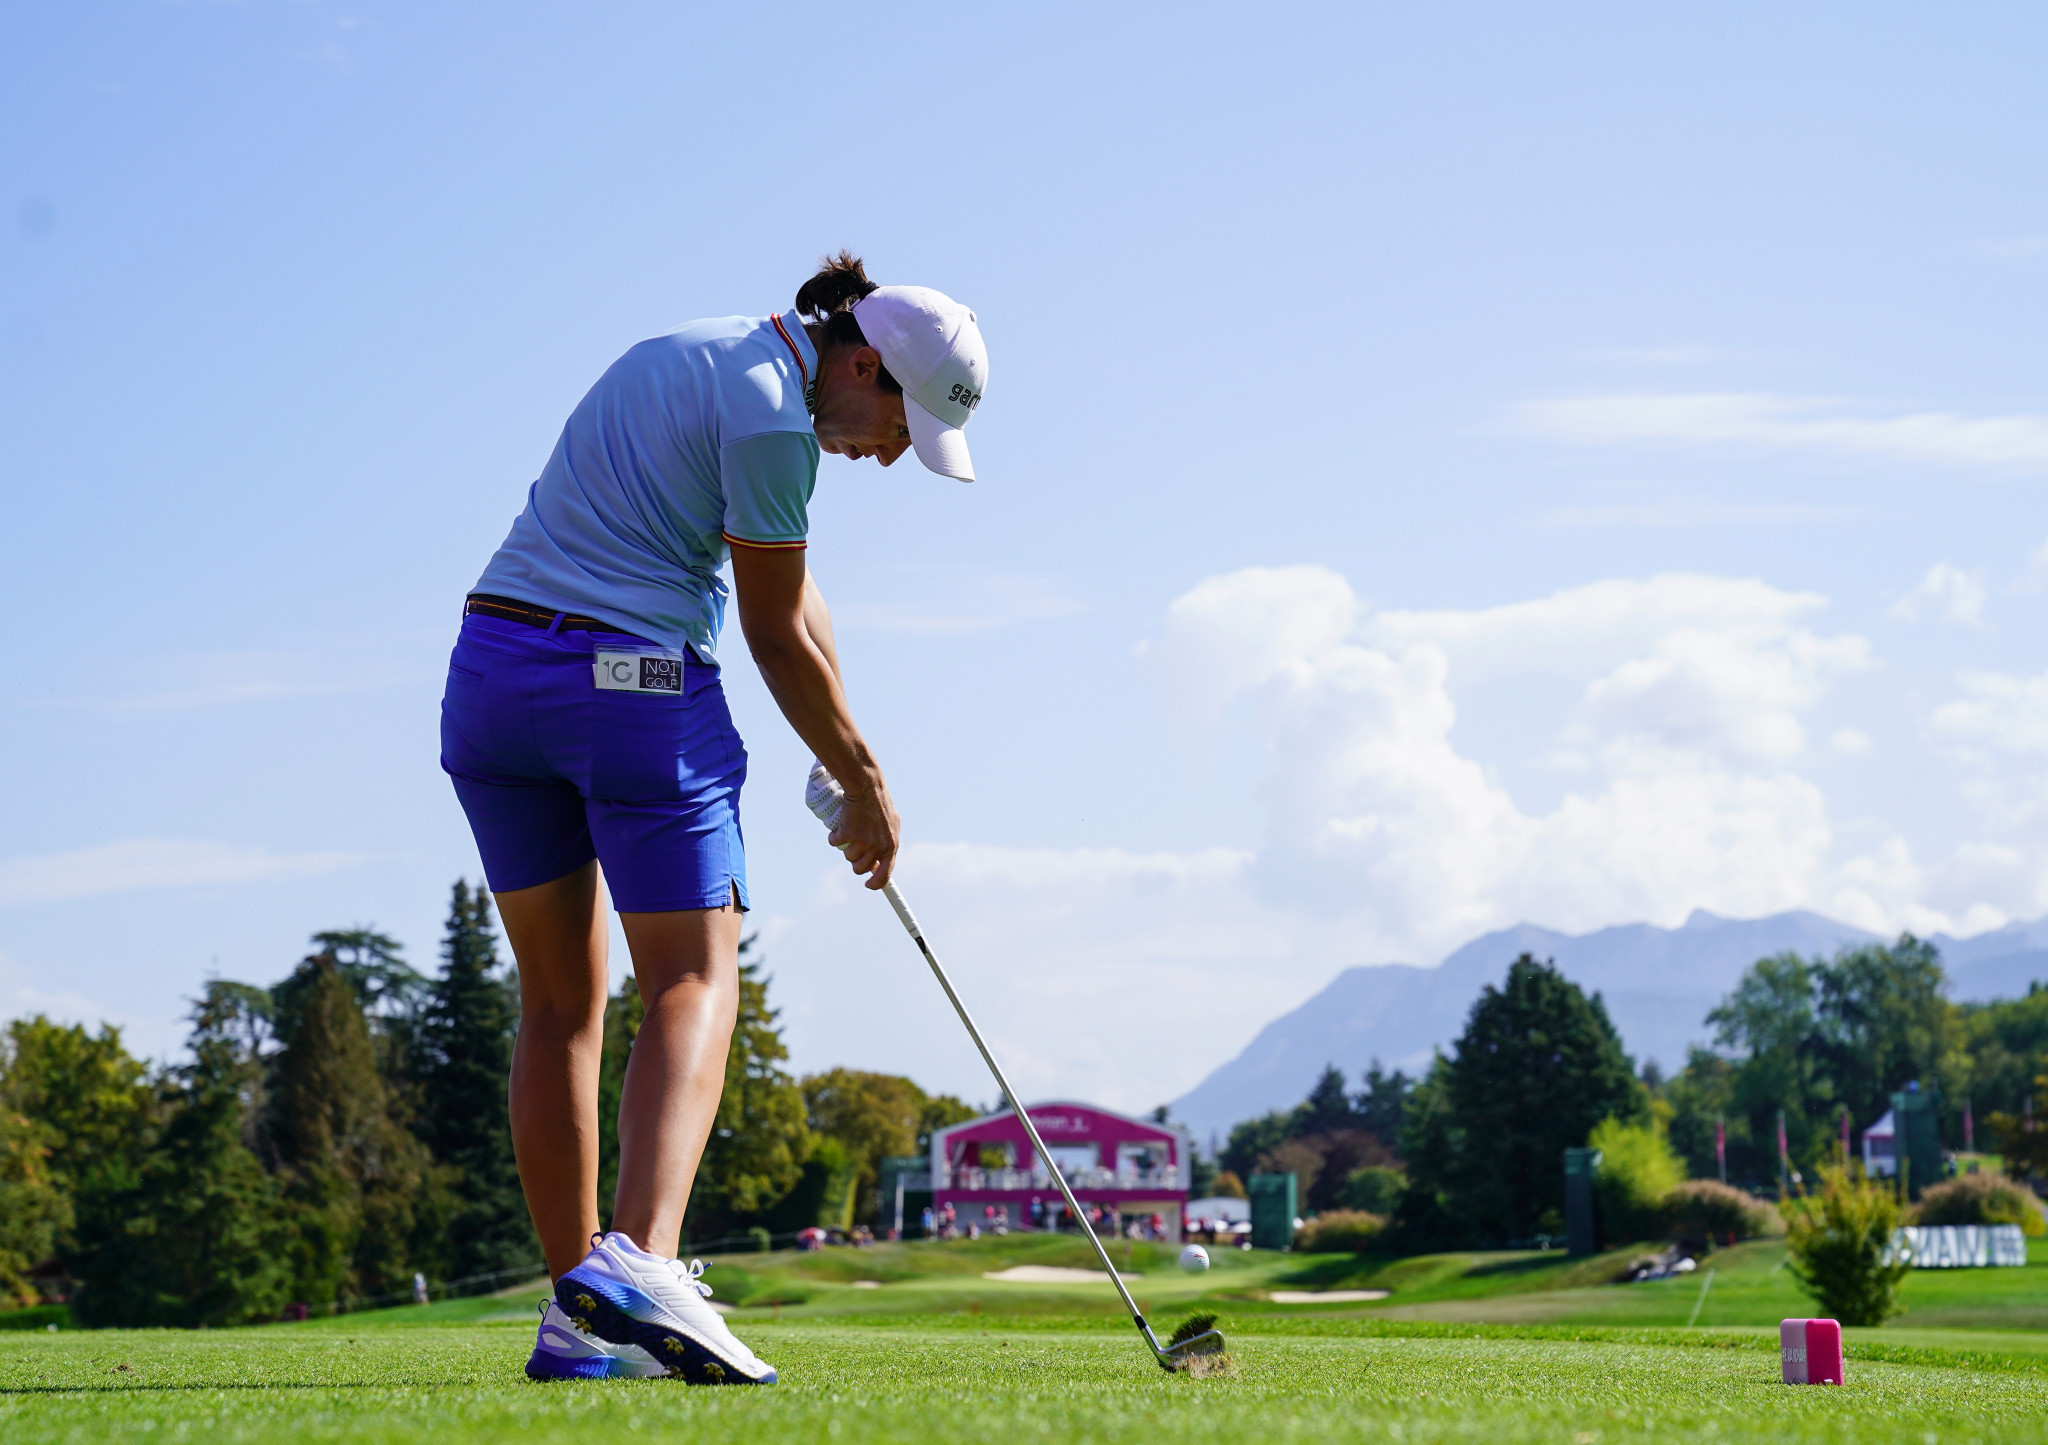 Ciganda and Torres tied for lead after opening round at Evian Championship